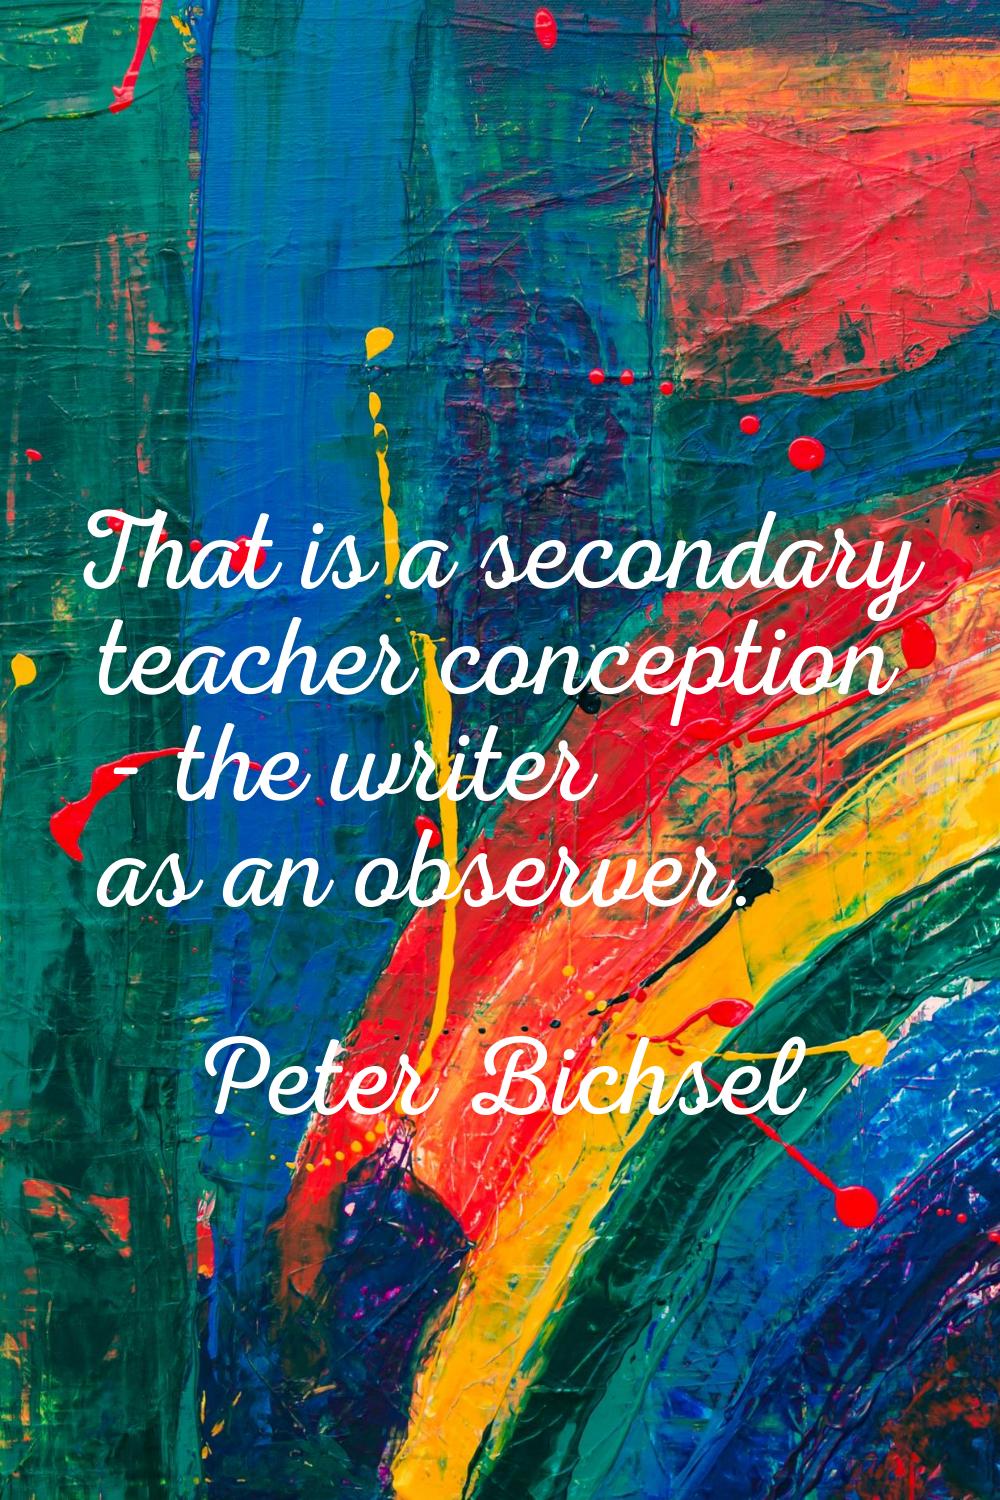 That is a secondary teacher conception - the writer as an observer.